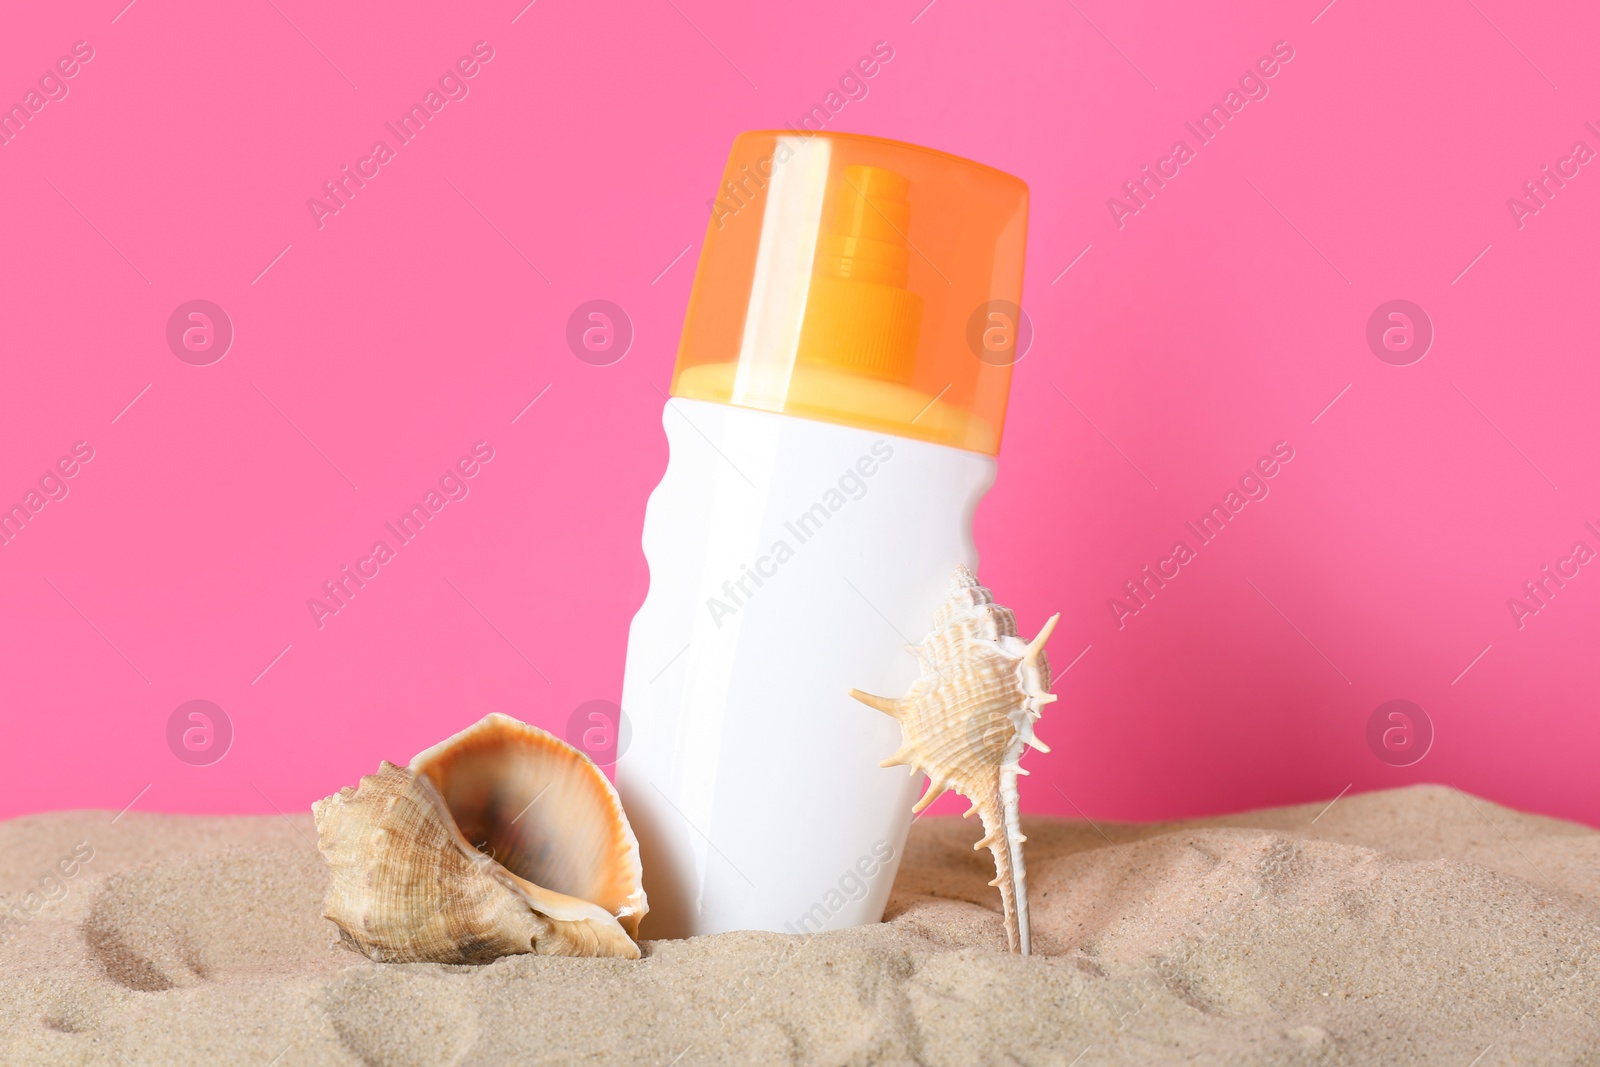 Photo of Suntan product, seashell and starfish on sand against pink background